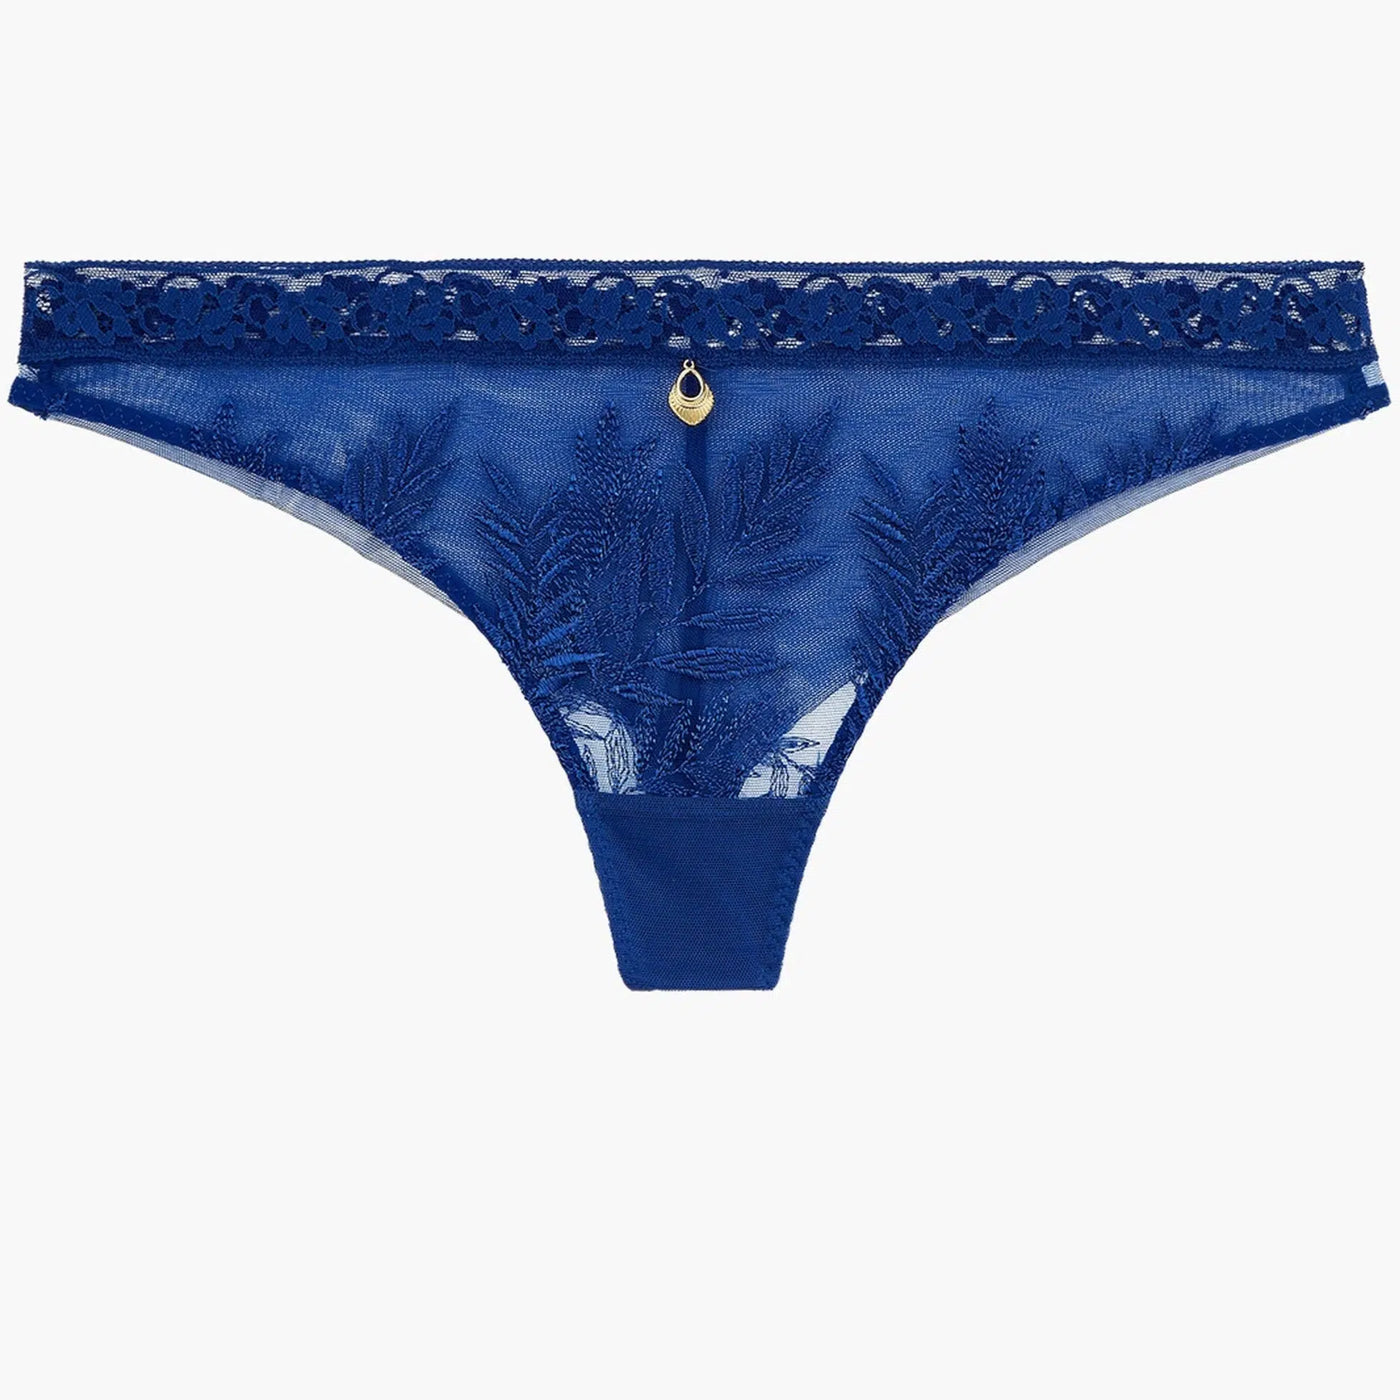 Aubade Parenthese Tropicale Tanga Electric Blue LB26-Panties-Aubade-Electric Blue-XSmall-Anna Bella Fine Lingerie, Reveal Your Most Gorgeous Self!